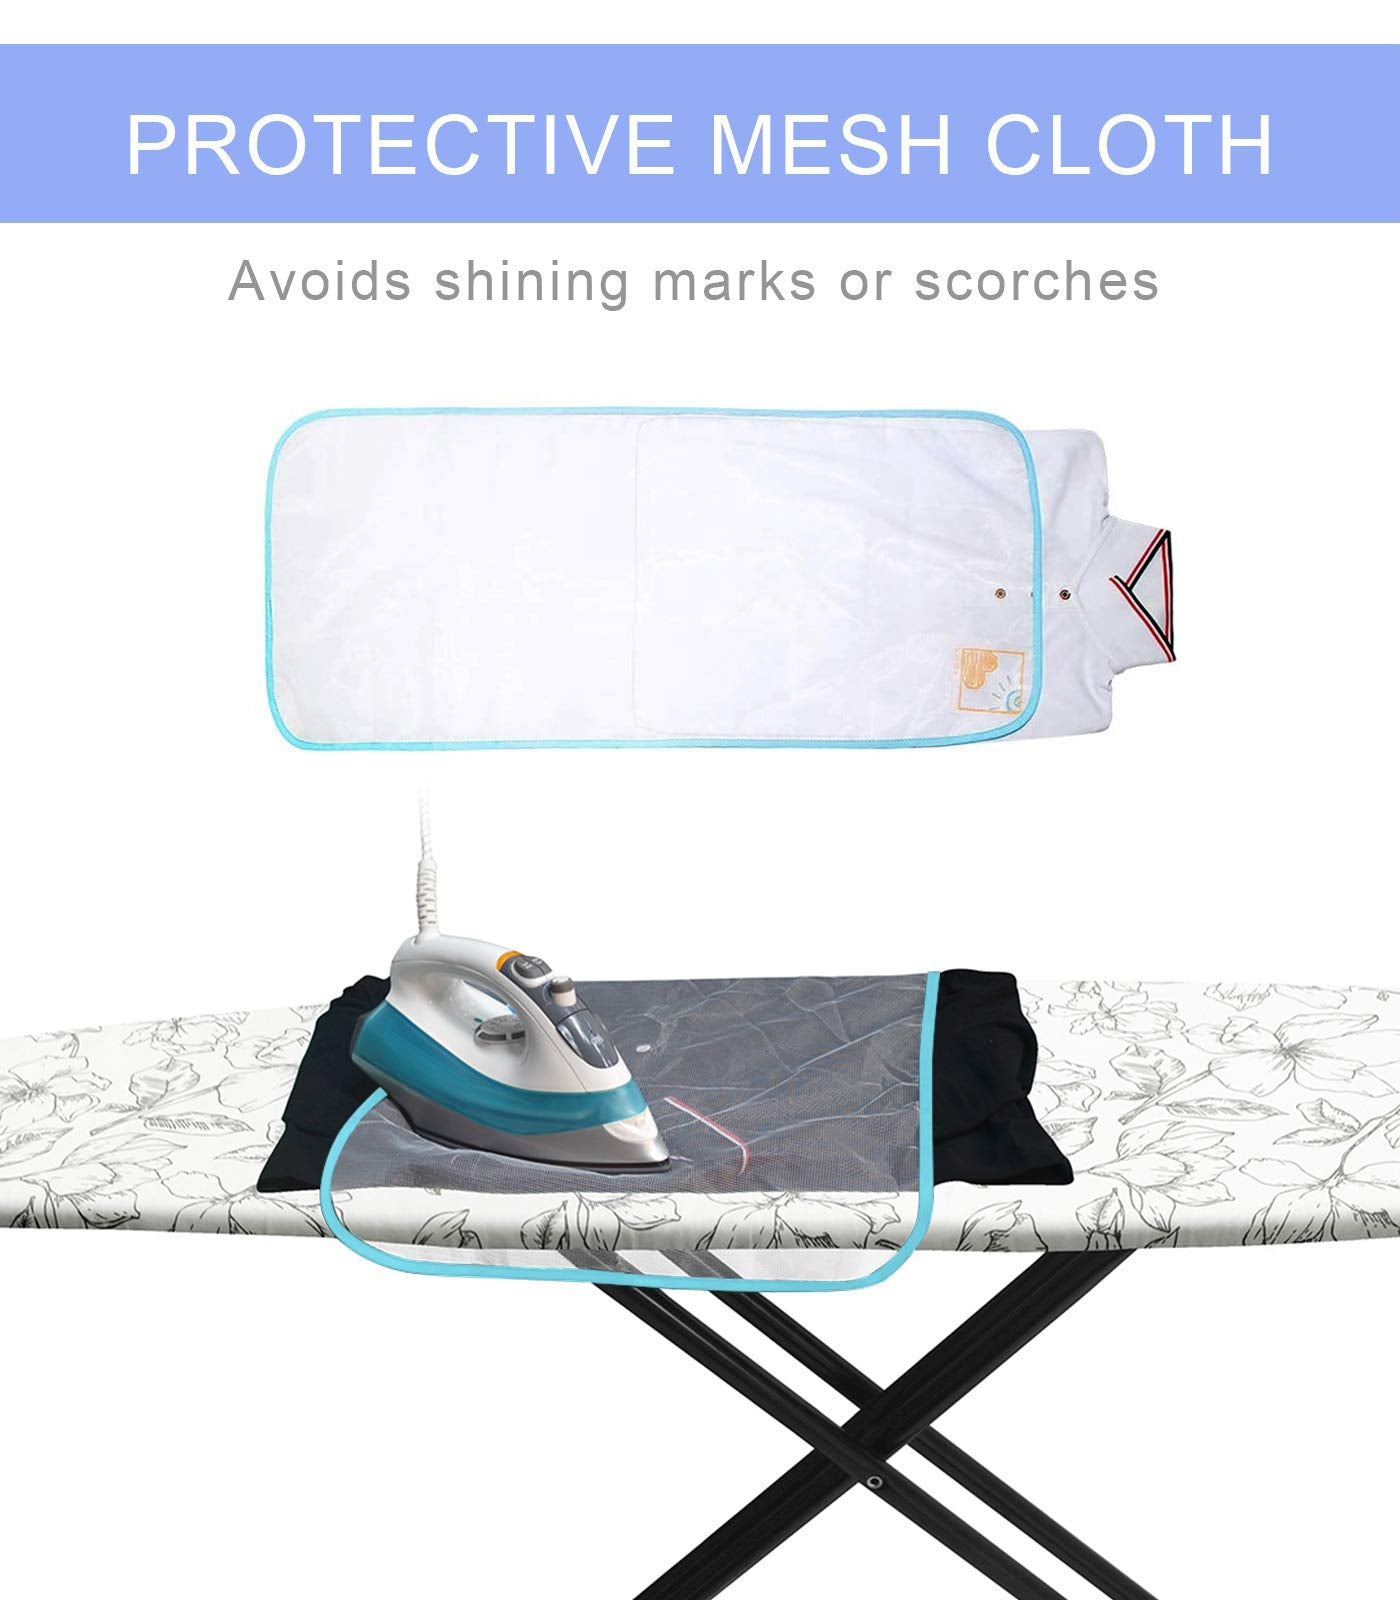 Dalykate 15x54 Ironing Board Cover and Pad with Elastic Edge and Scorch and Stain Resistant Thick Padding Ironing Board Covers 4 Fasteners and Protective Scorch Mesh Cloth